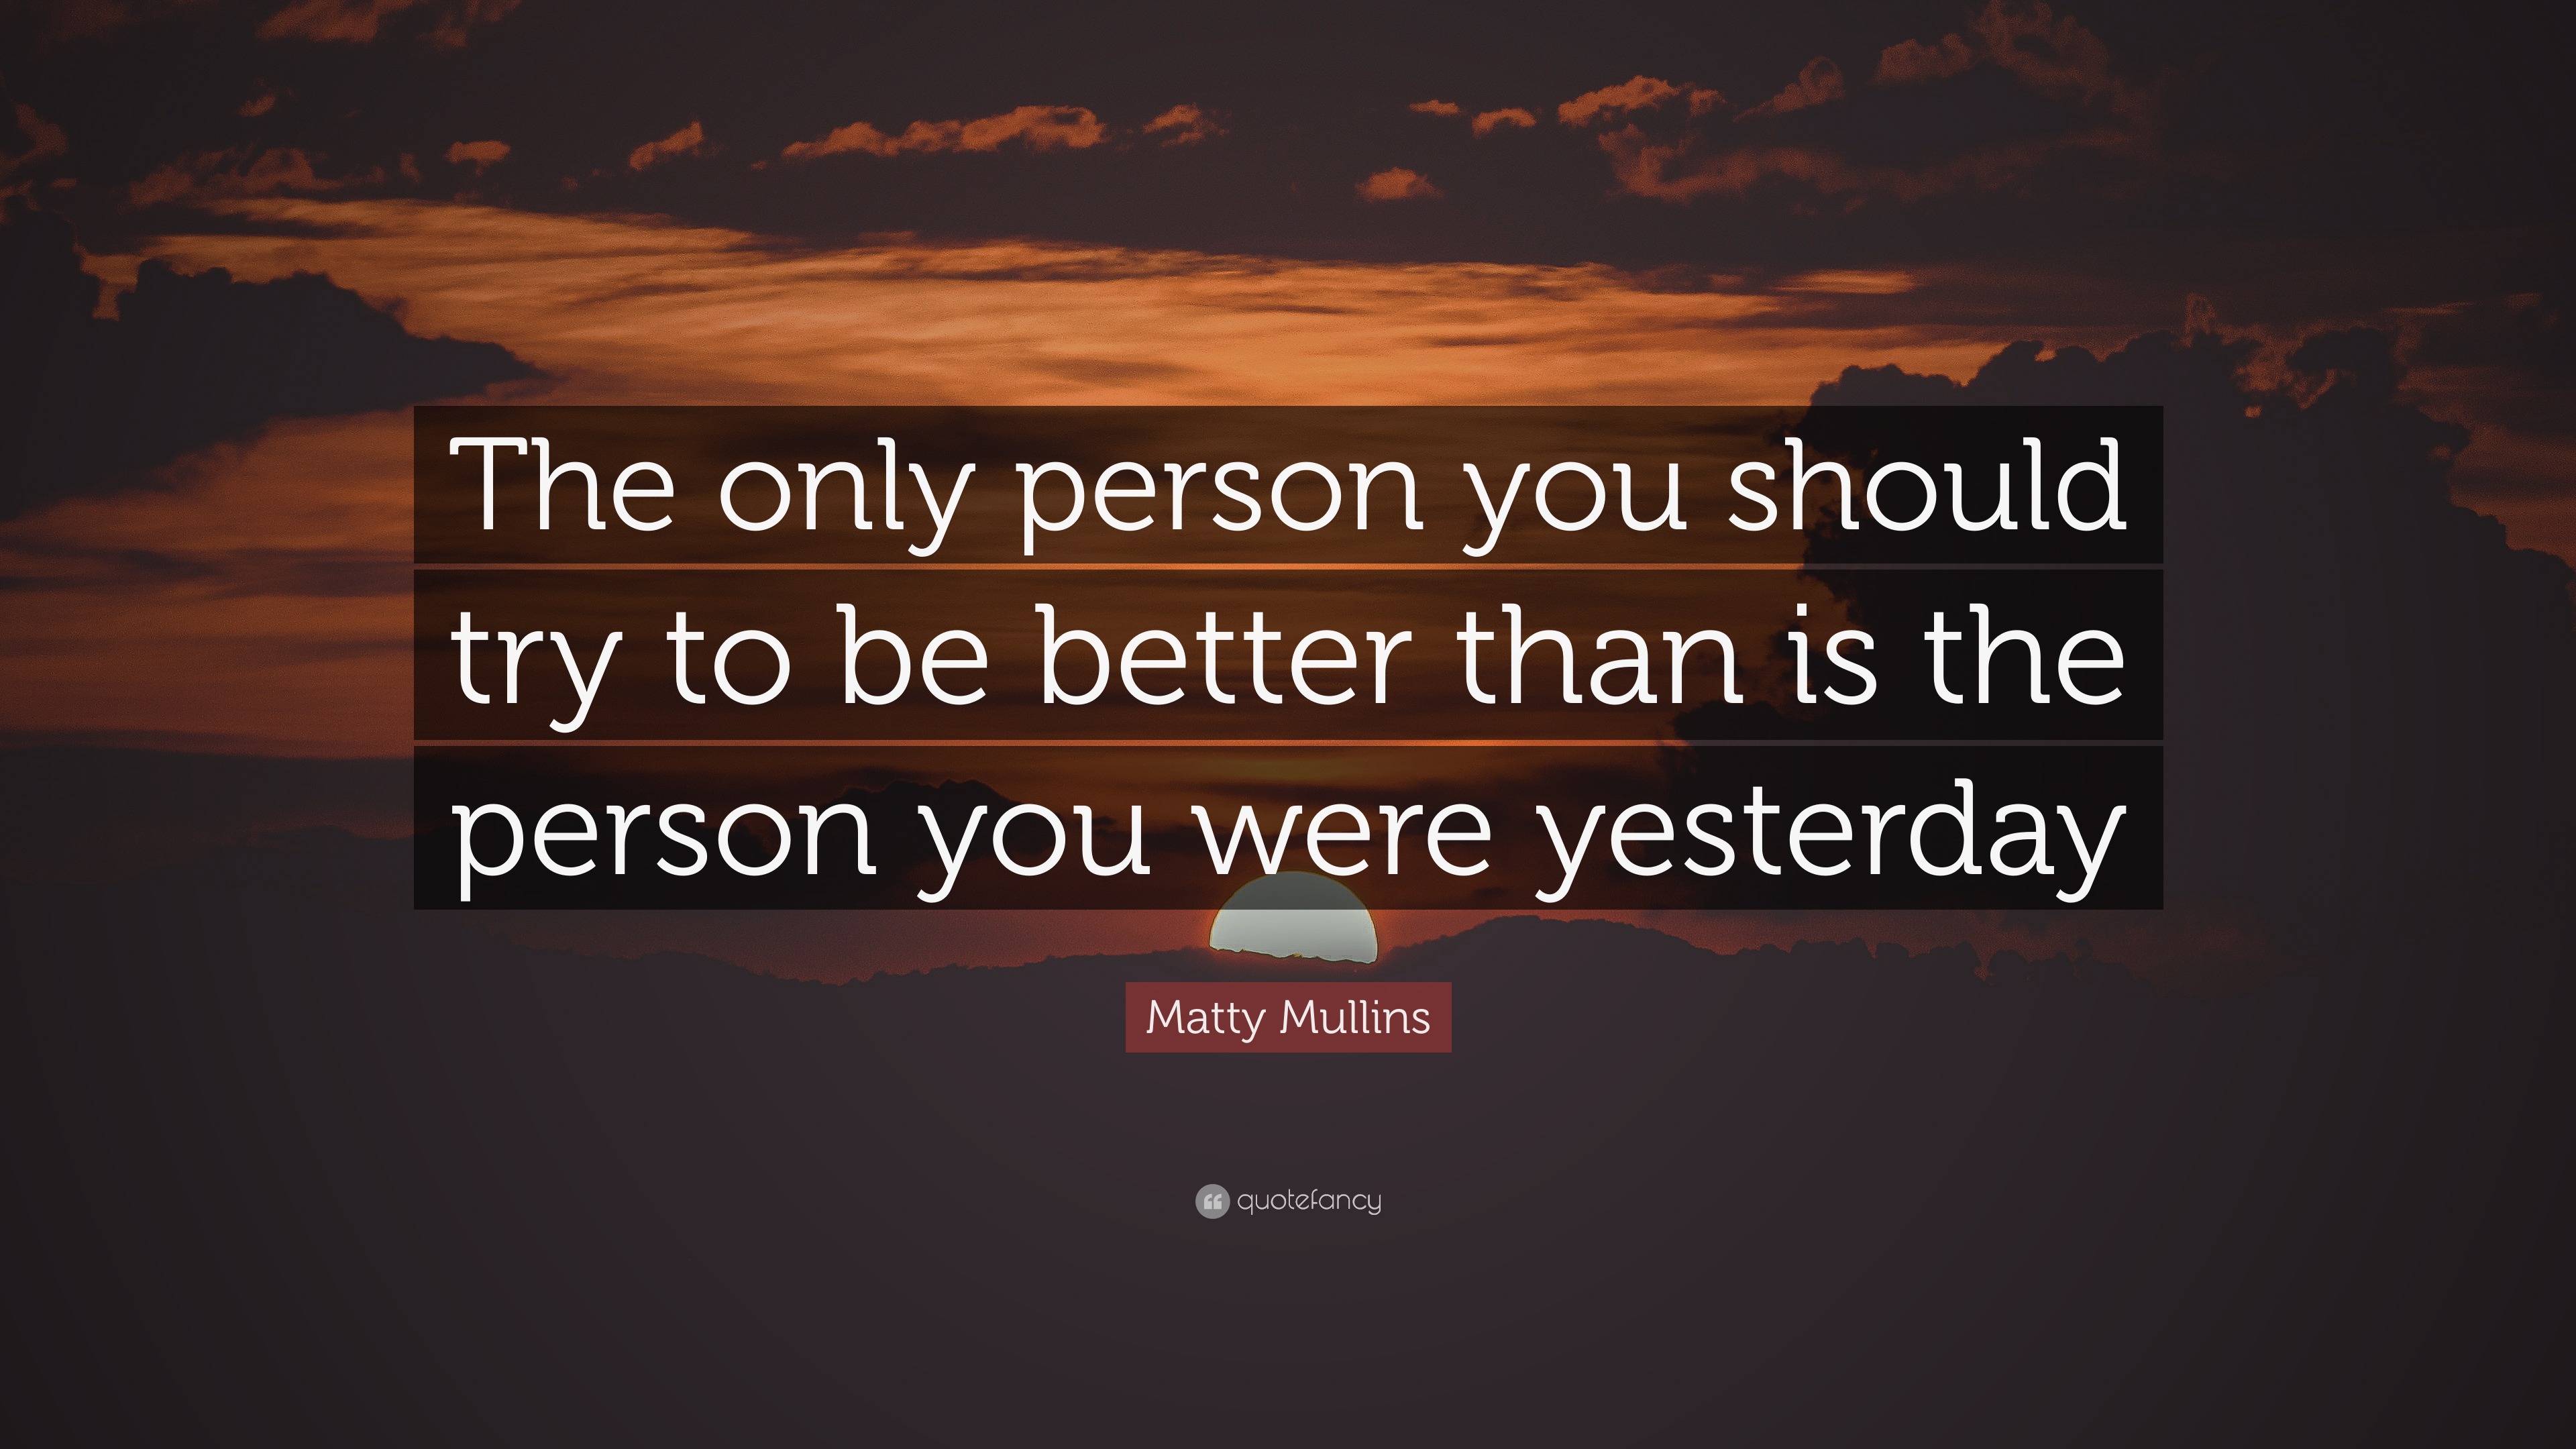 You should try this. You should be better today than yesterday. Yesterday quotes. I am better than you images.